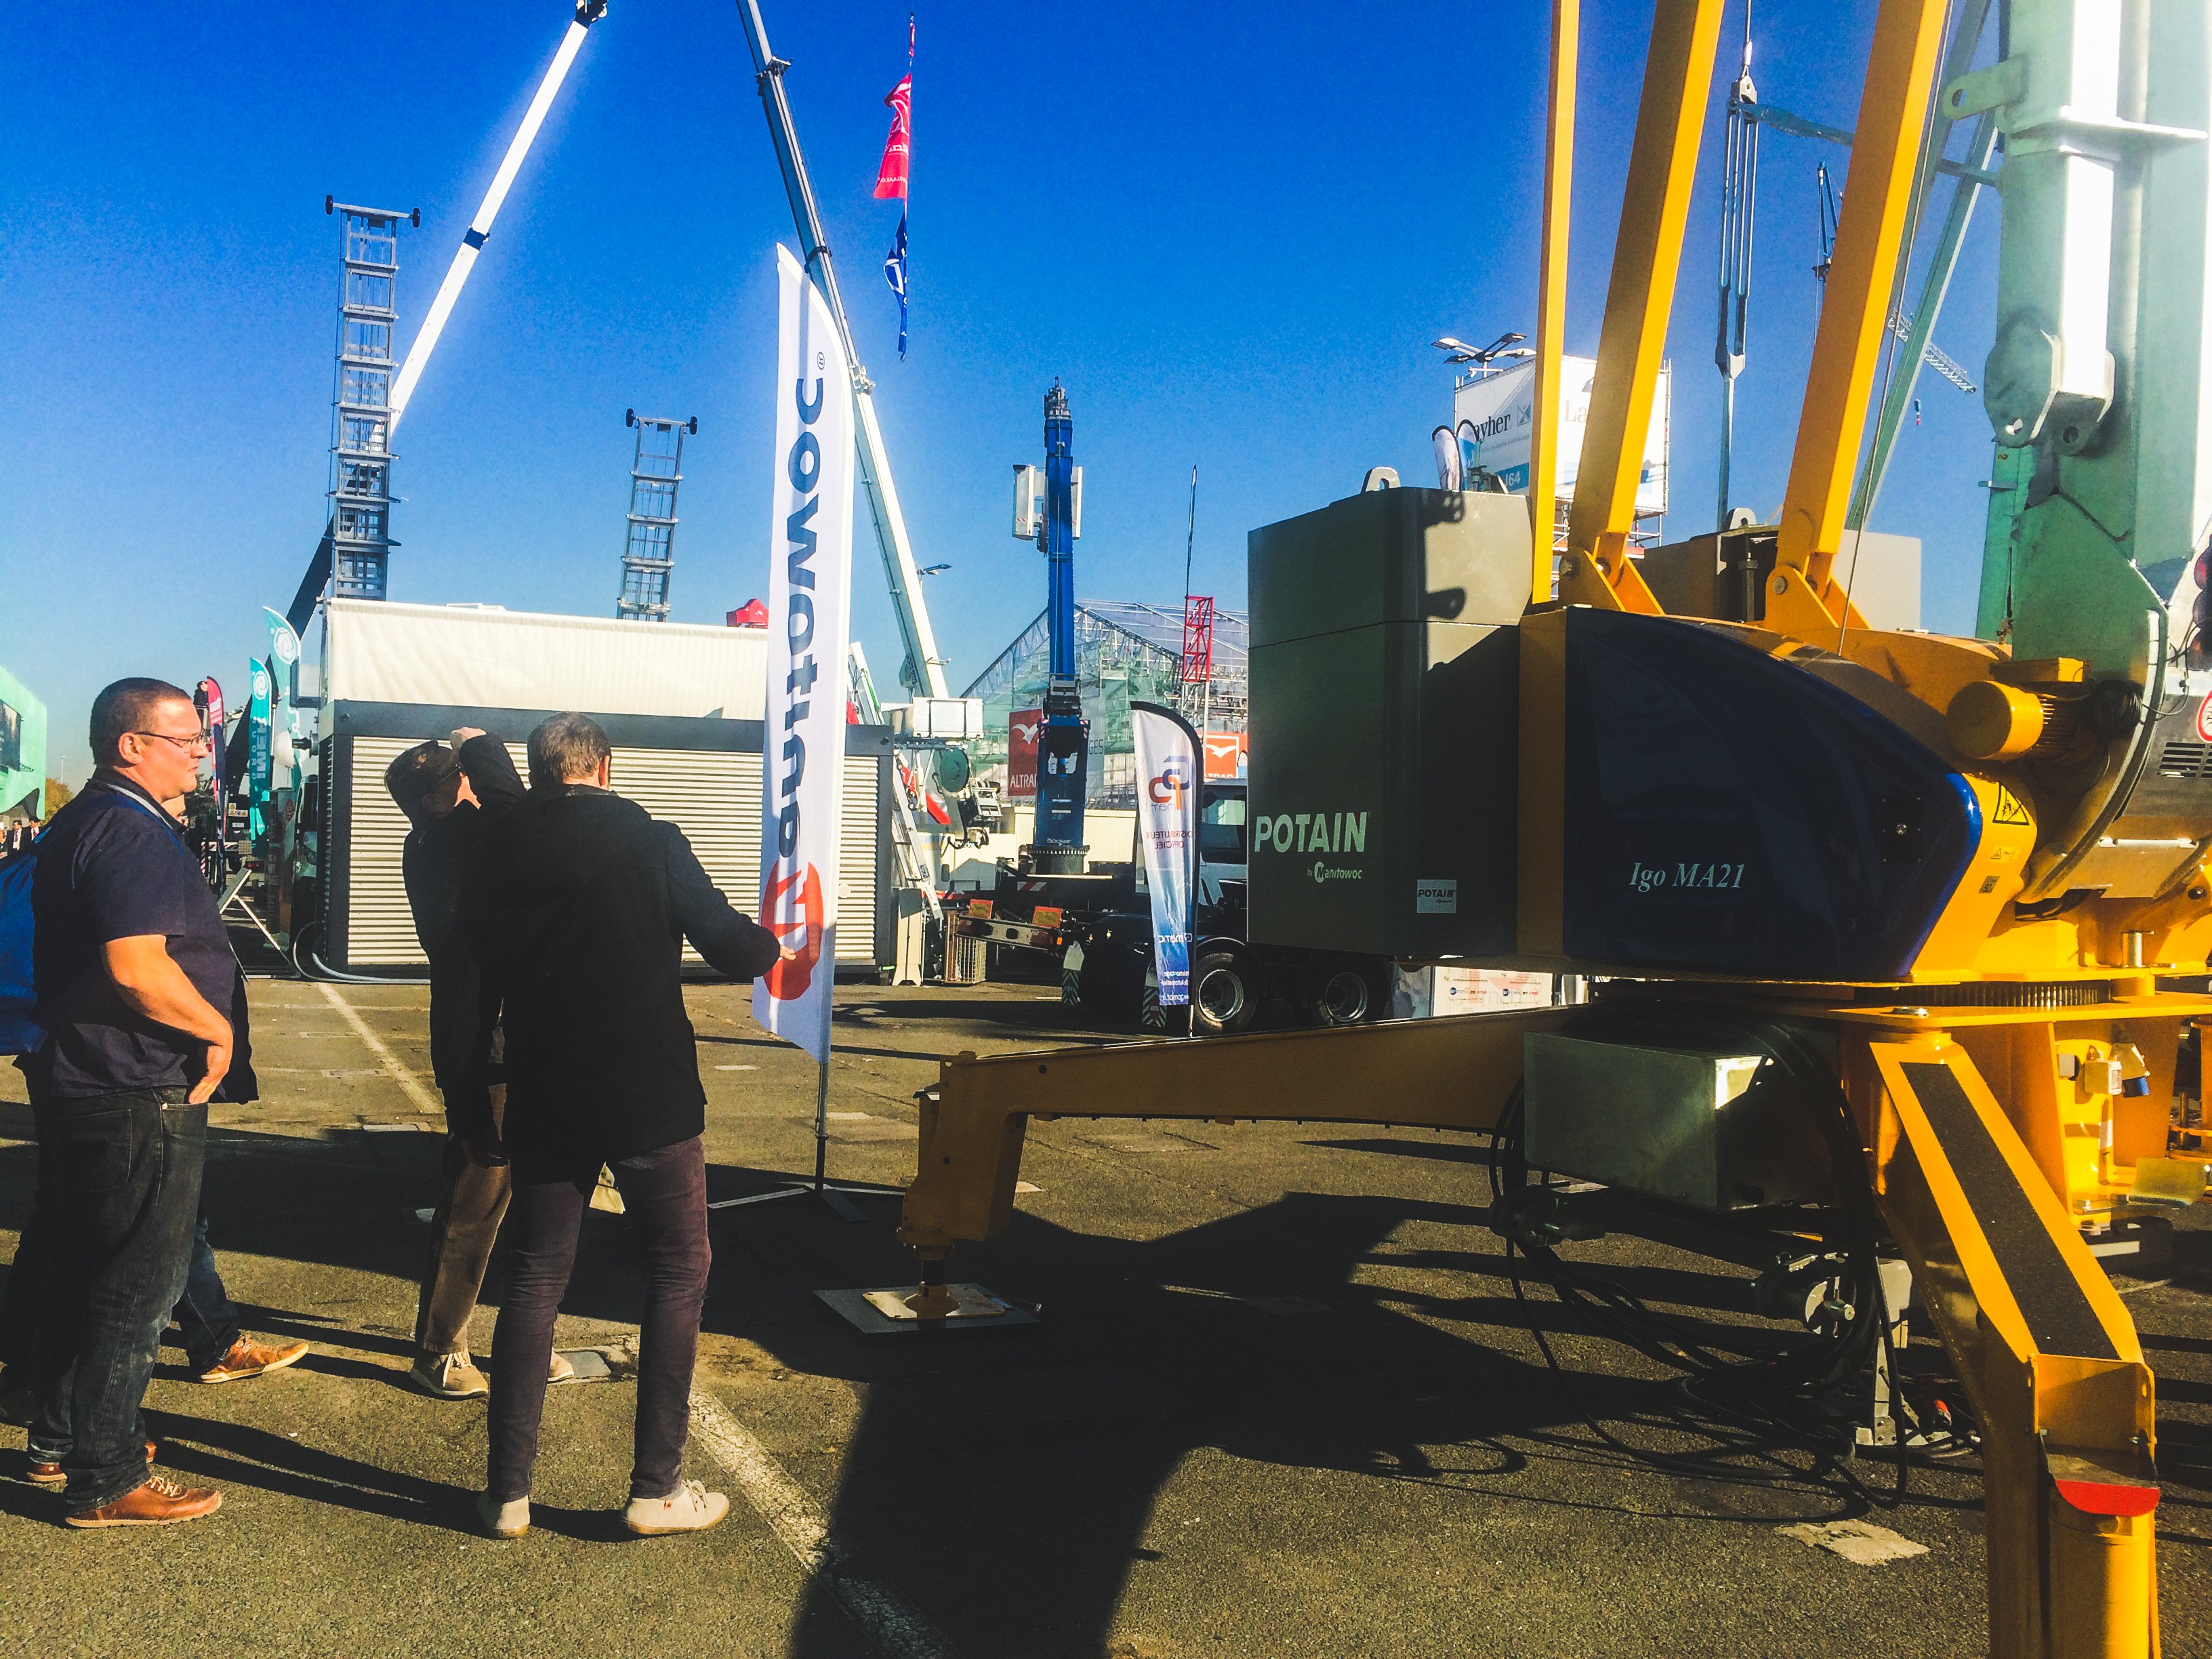 Potain once again showcased the strength of its self-erecting crane range at Batimat 2017. From November 6 – 10, Potain occupied both indoor and outdoor booths at Batimat, displaying two Igo M cranes that are ideal for small contractors and other lifters that require compact, easily transportable lifting solutions.